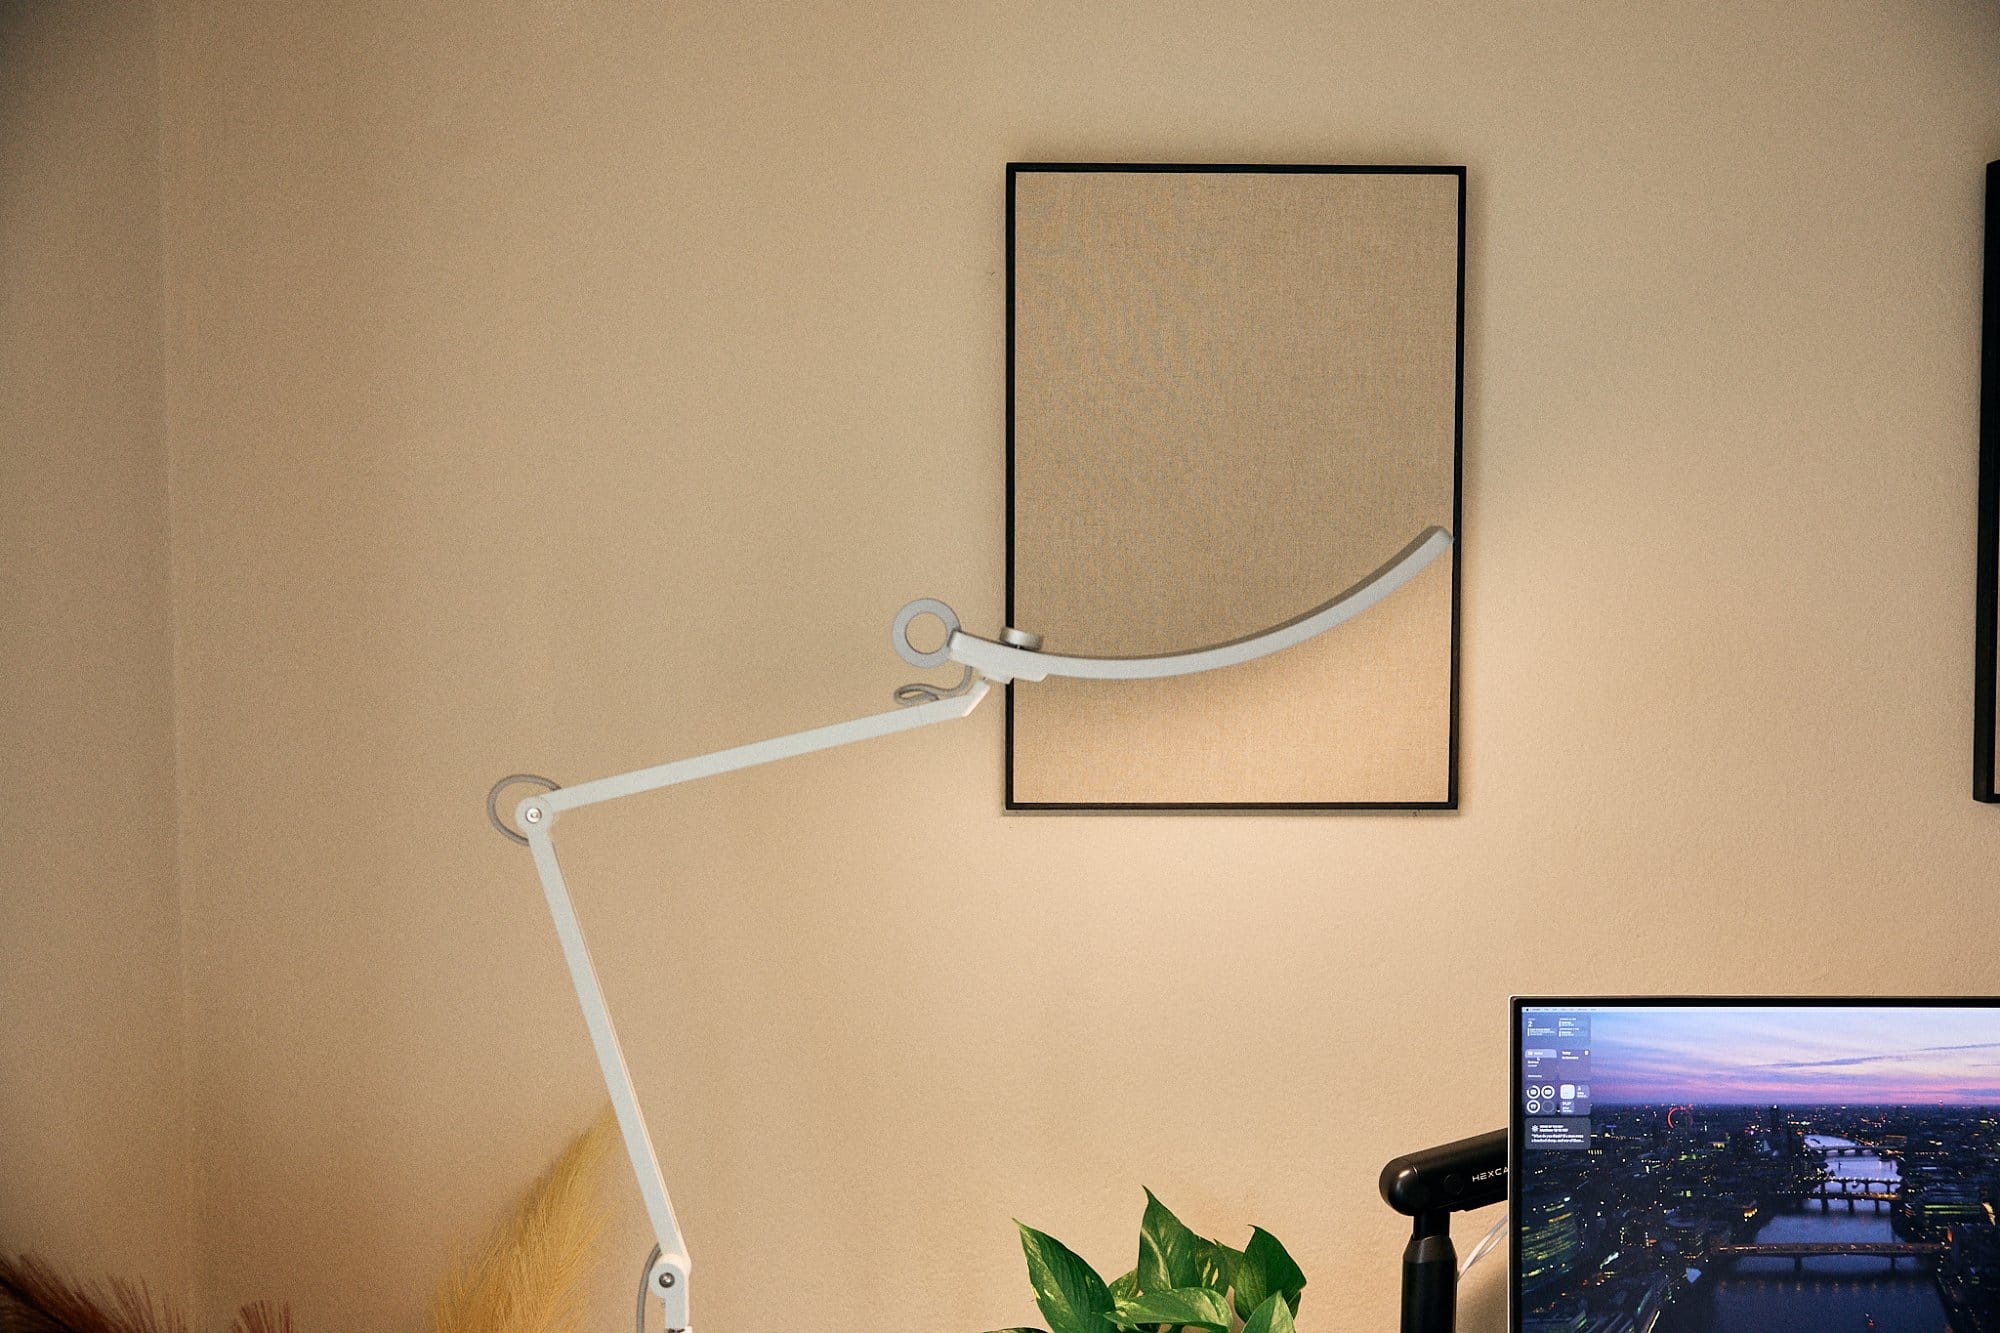 An adjustable white floor lamp is positioned next to a canvas wall art piece above a modern home office setup with a partial view of a monitor